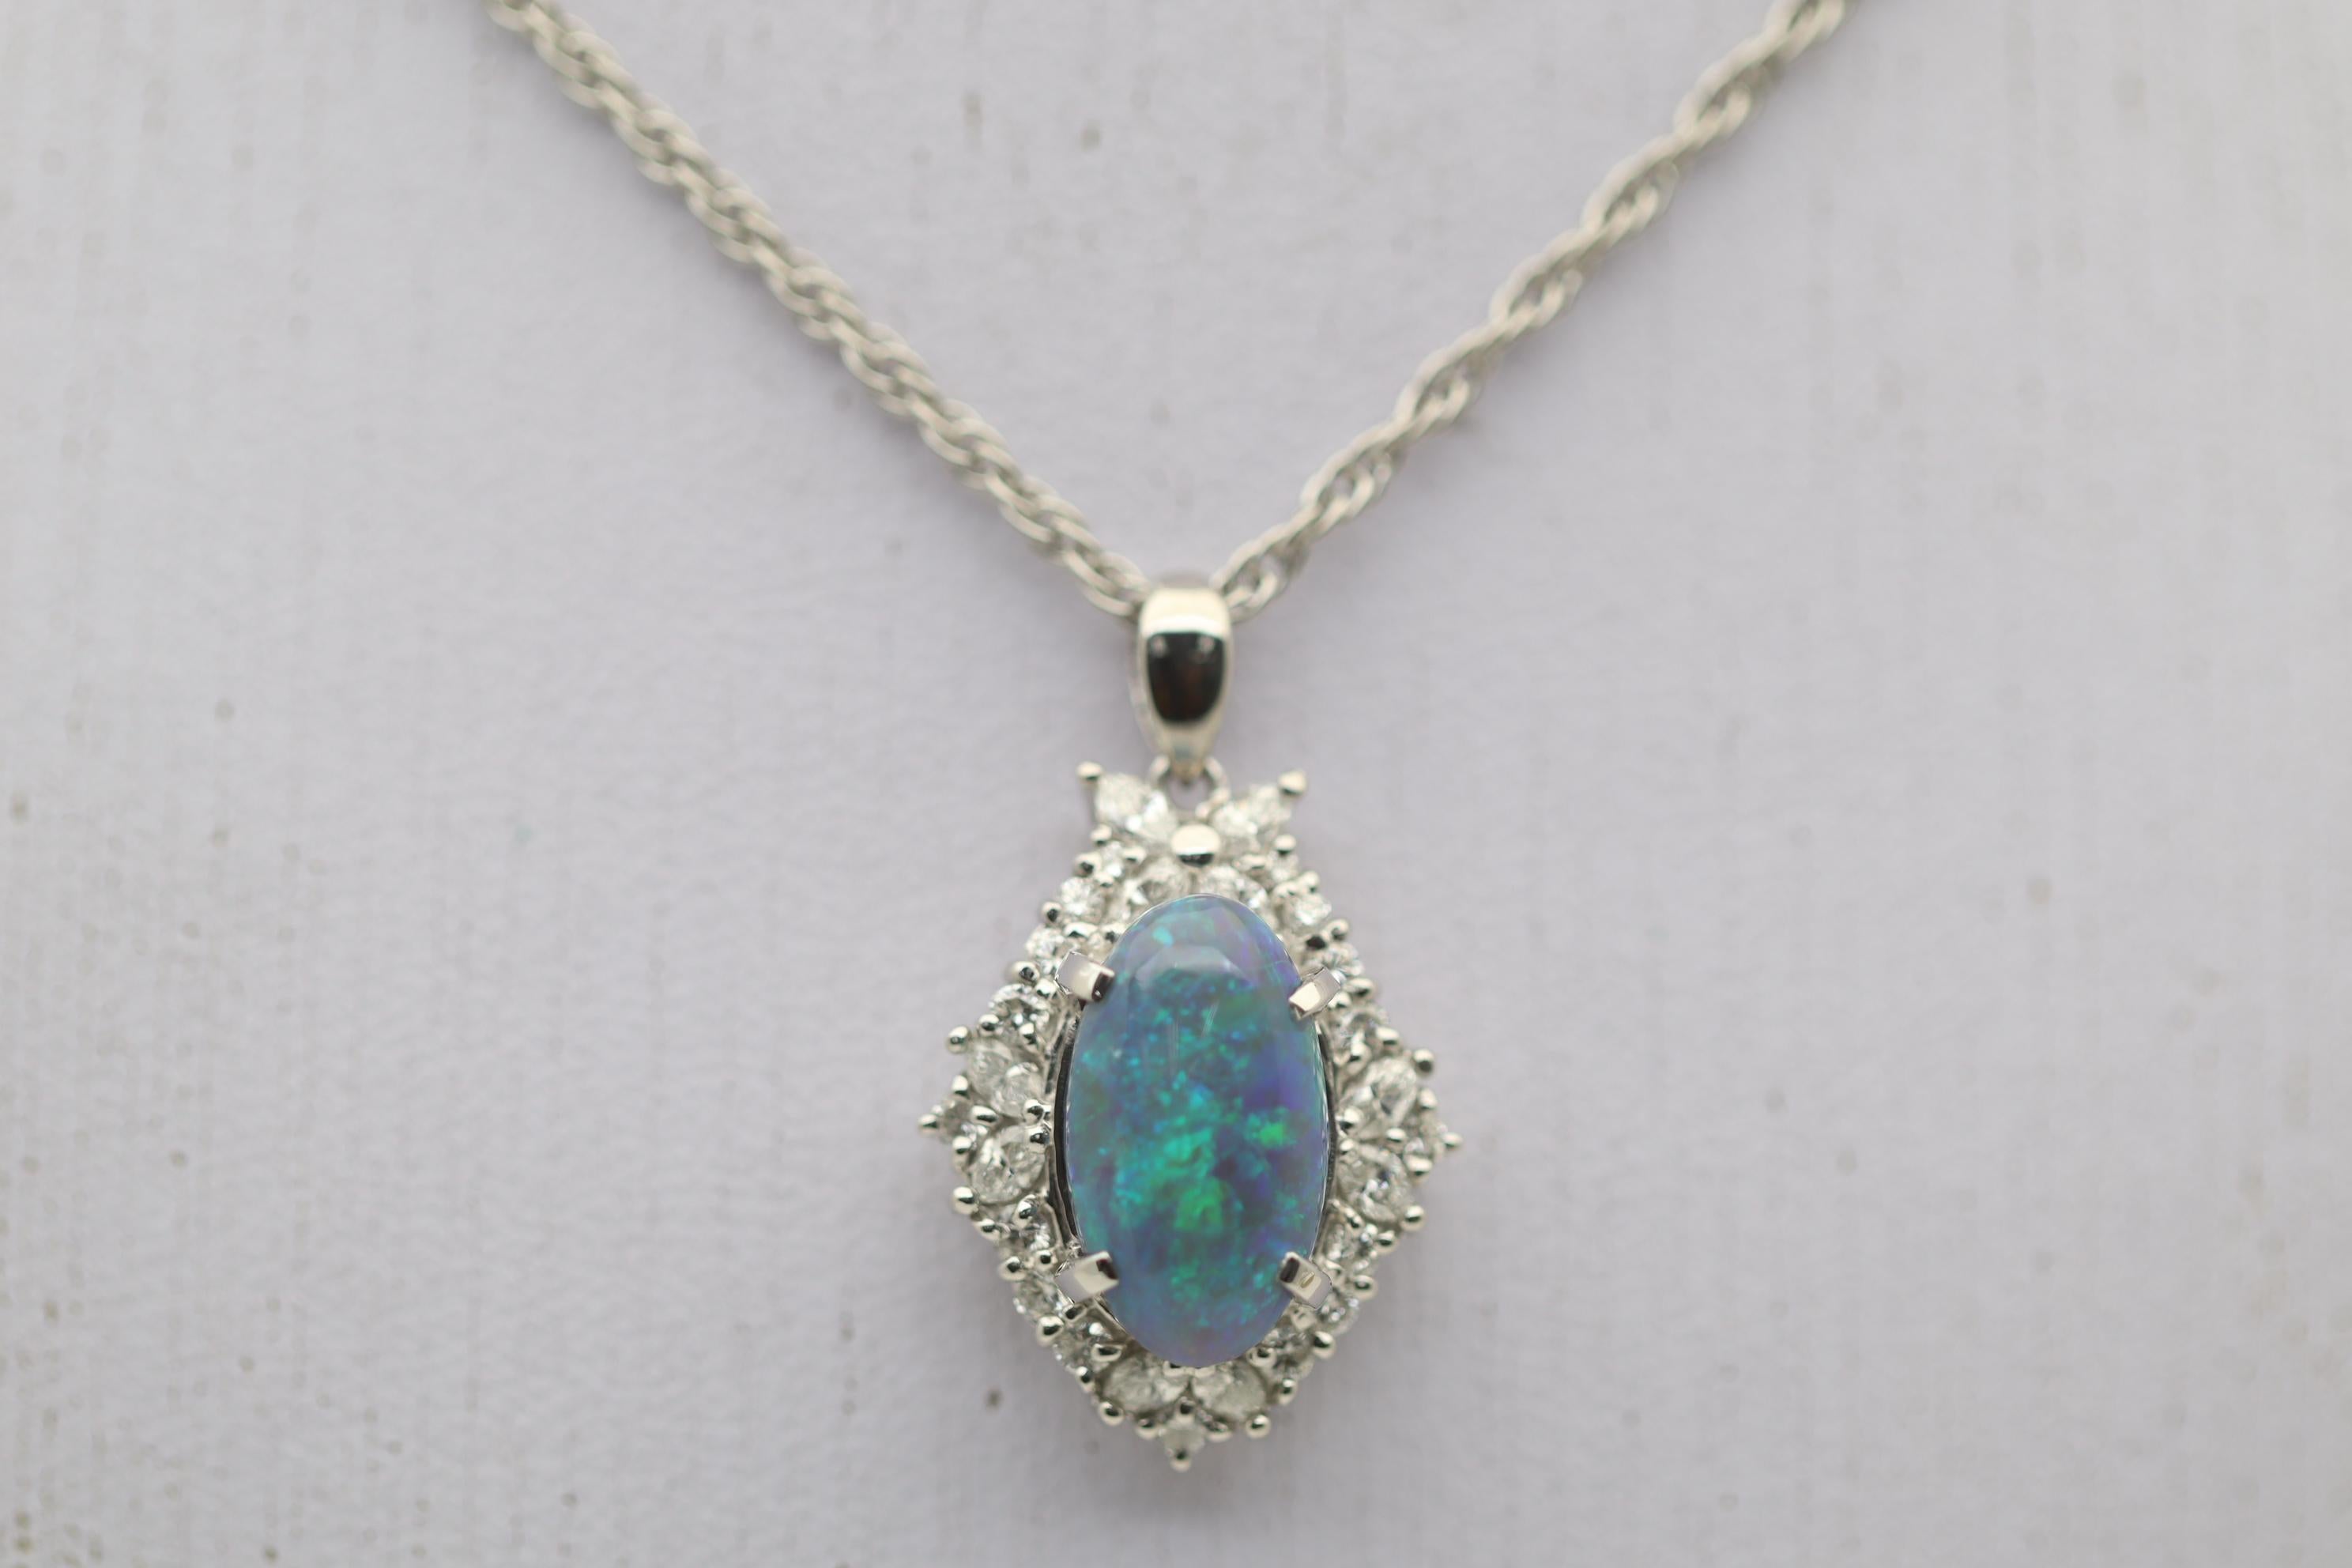 A lovely platinum pendant featuring a natural Australian opal! It weighs approximately 4 carats and has great play-of-color as flashes of greens and blues can be seen across the stone. It is complemented by 0.78 carats of marquise and round